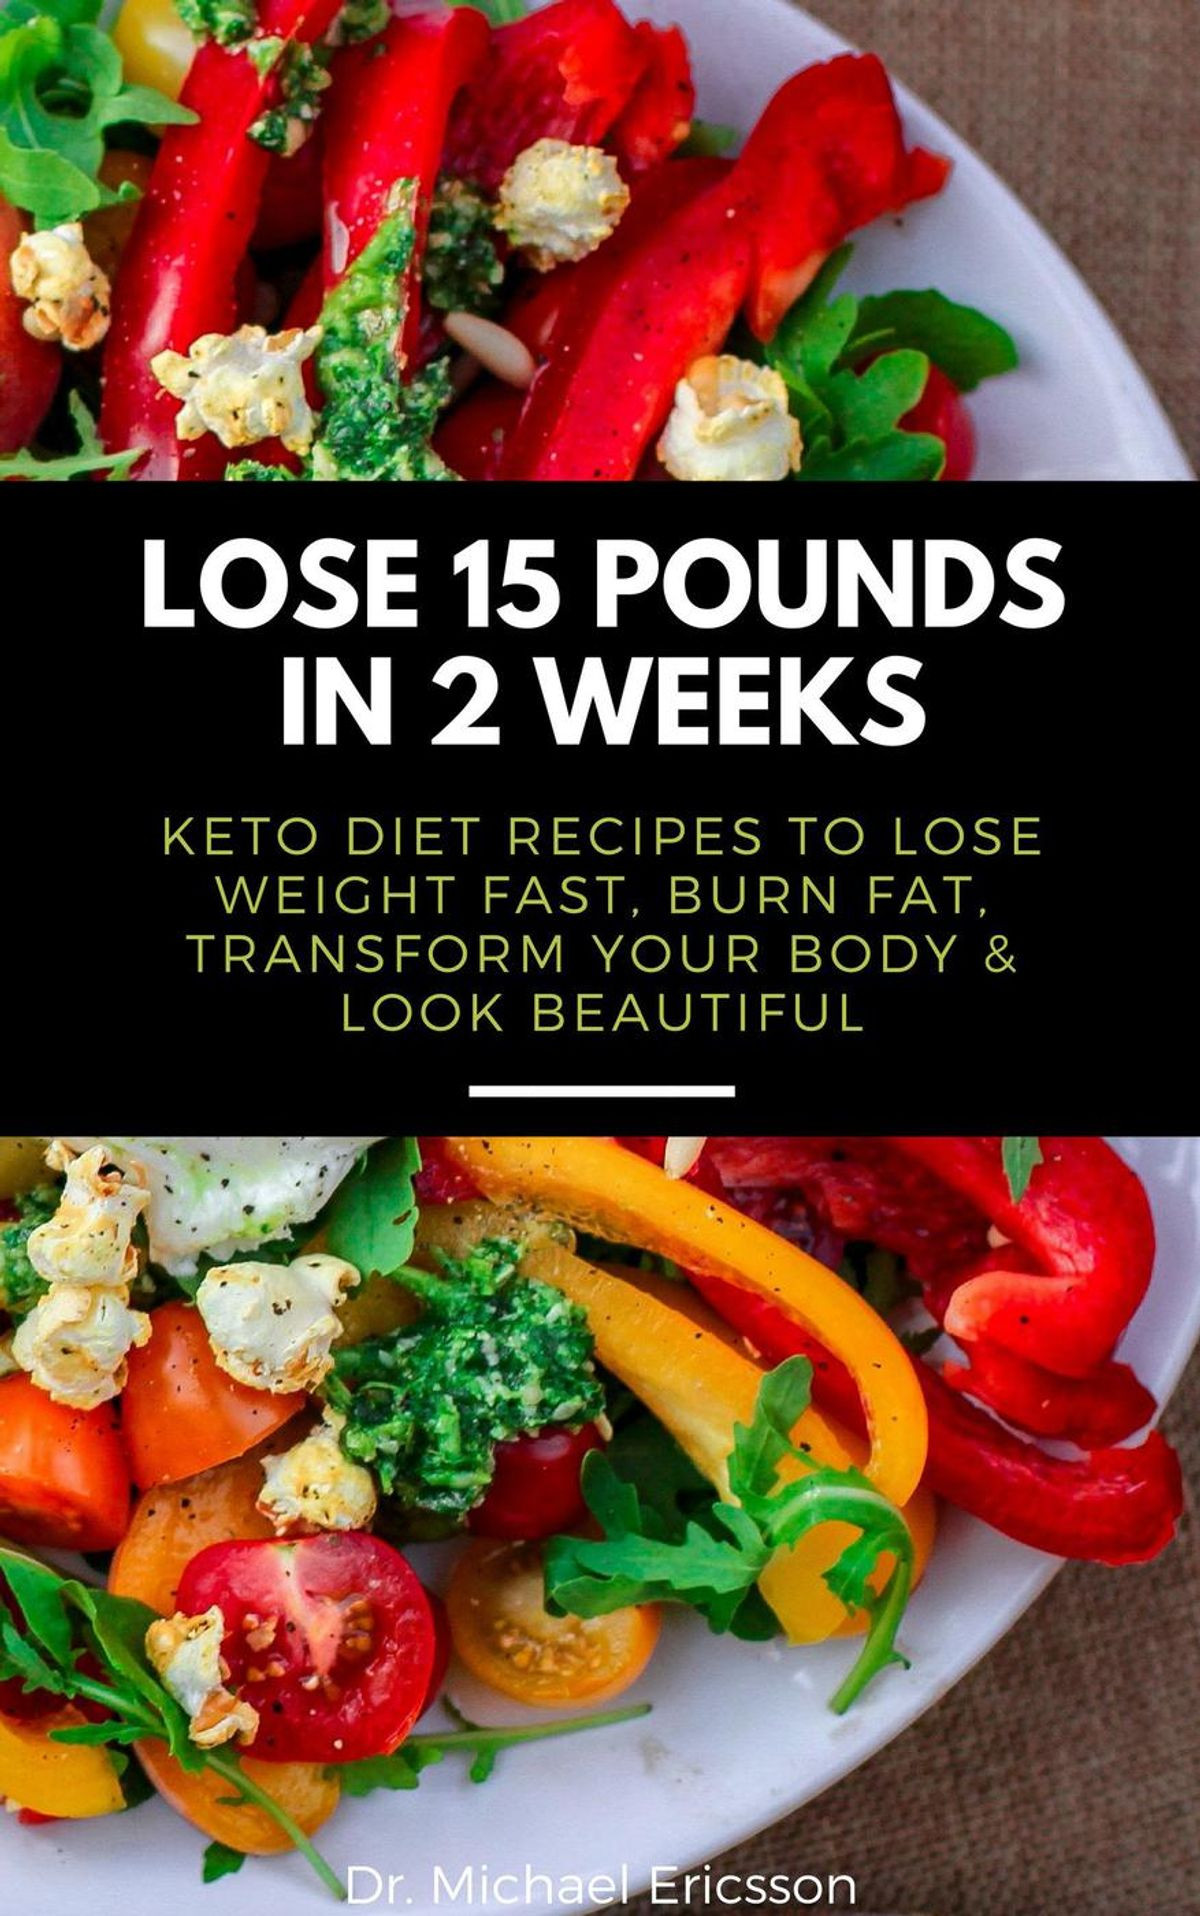 How To Lose Weight On Keto
 Lose 15 Pounds in 2 Weeks Keto Diet Recipes to Lose